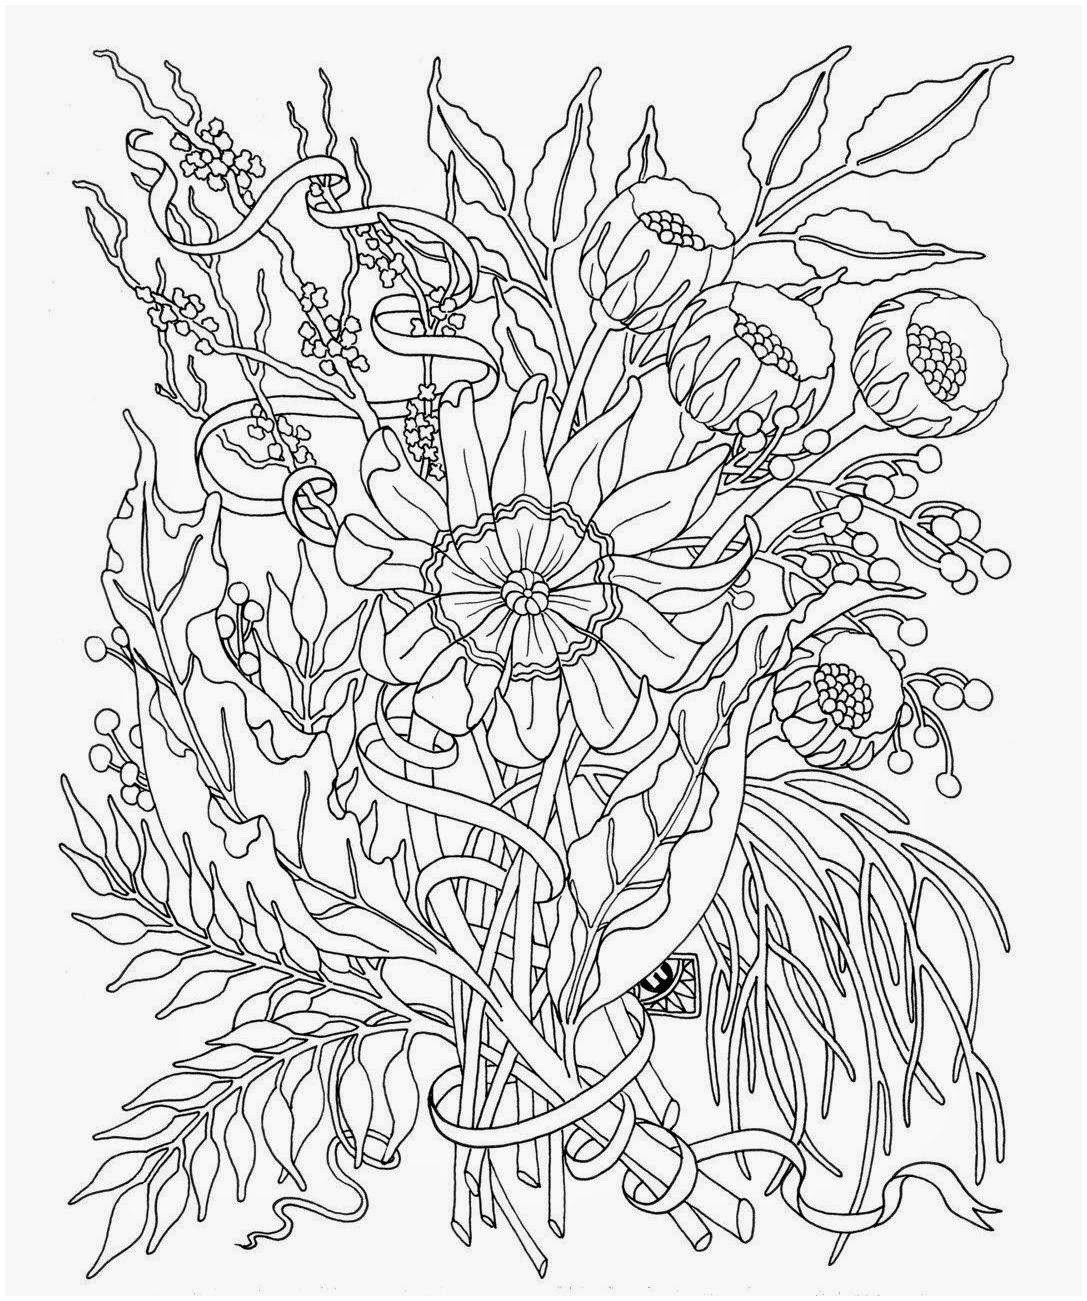 28 Cute Flower Vase Photos 2023 free download flower vase photos of coloring pages disney best of vases flower vase coloring page pages with regard to coloring pages disney best of vases flower vase coloring page pages flowers in a top 